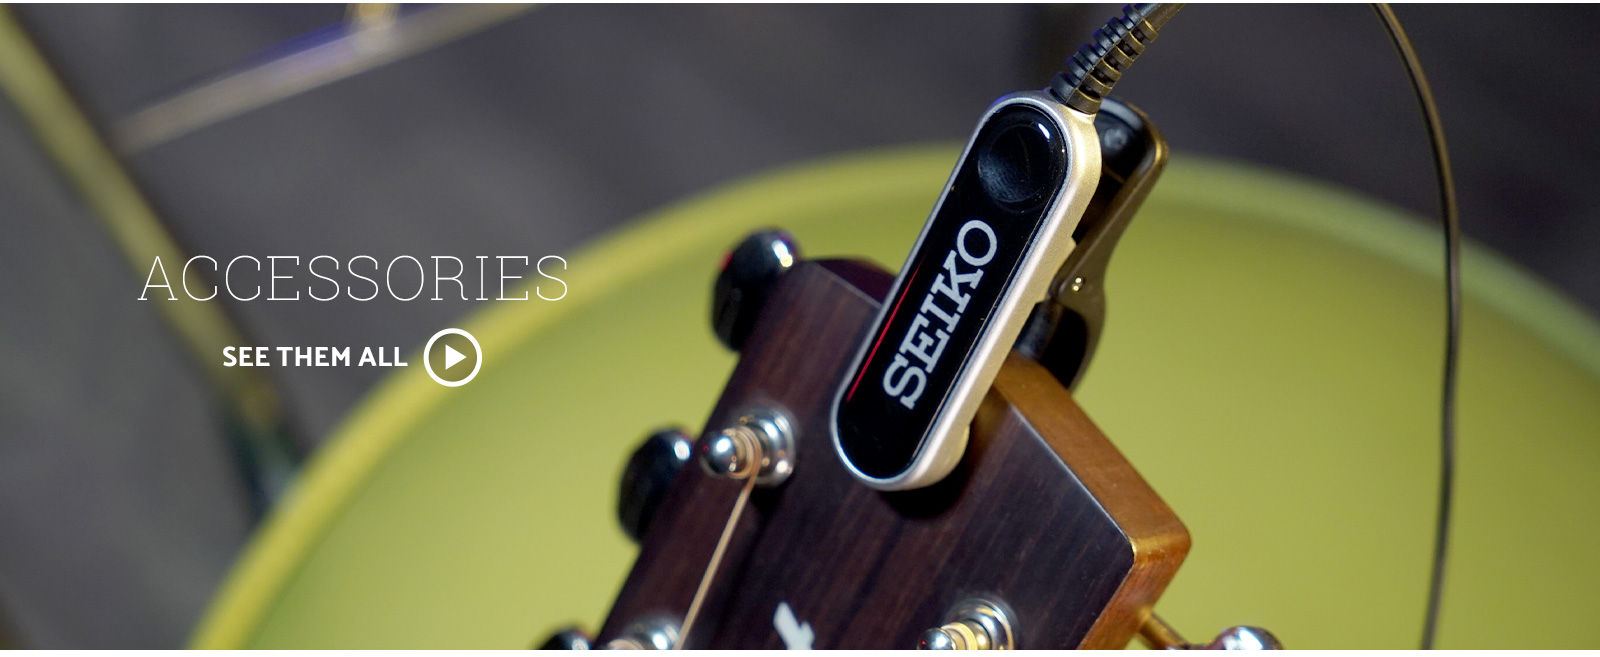 Seiko clip on microphone is clipped to an acoustic guitar headstock in front of a green stool. Text says Accessories, click to see them.